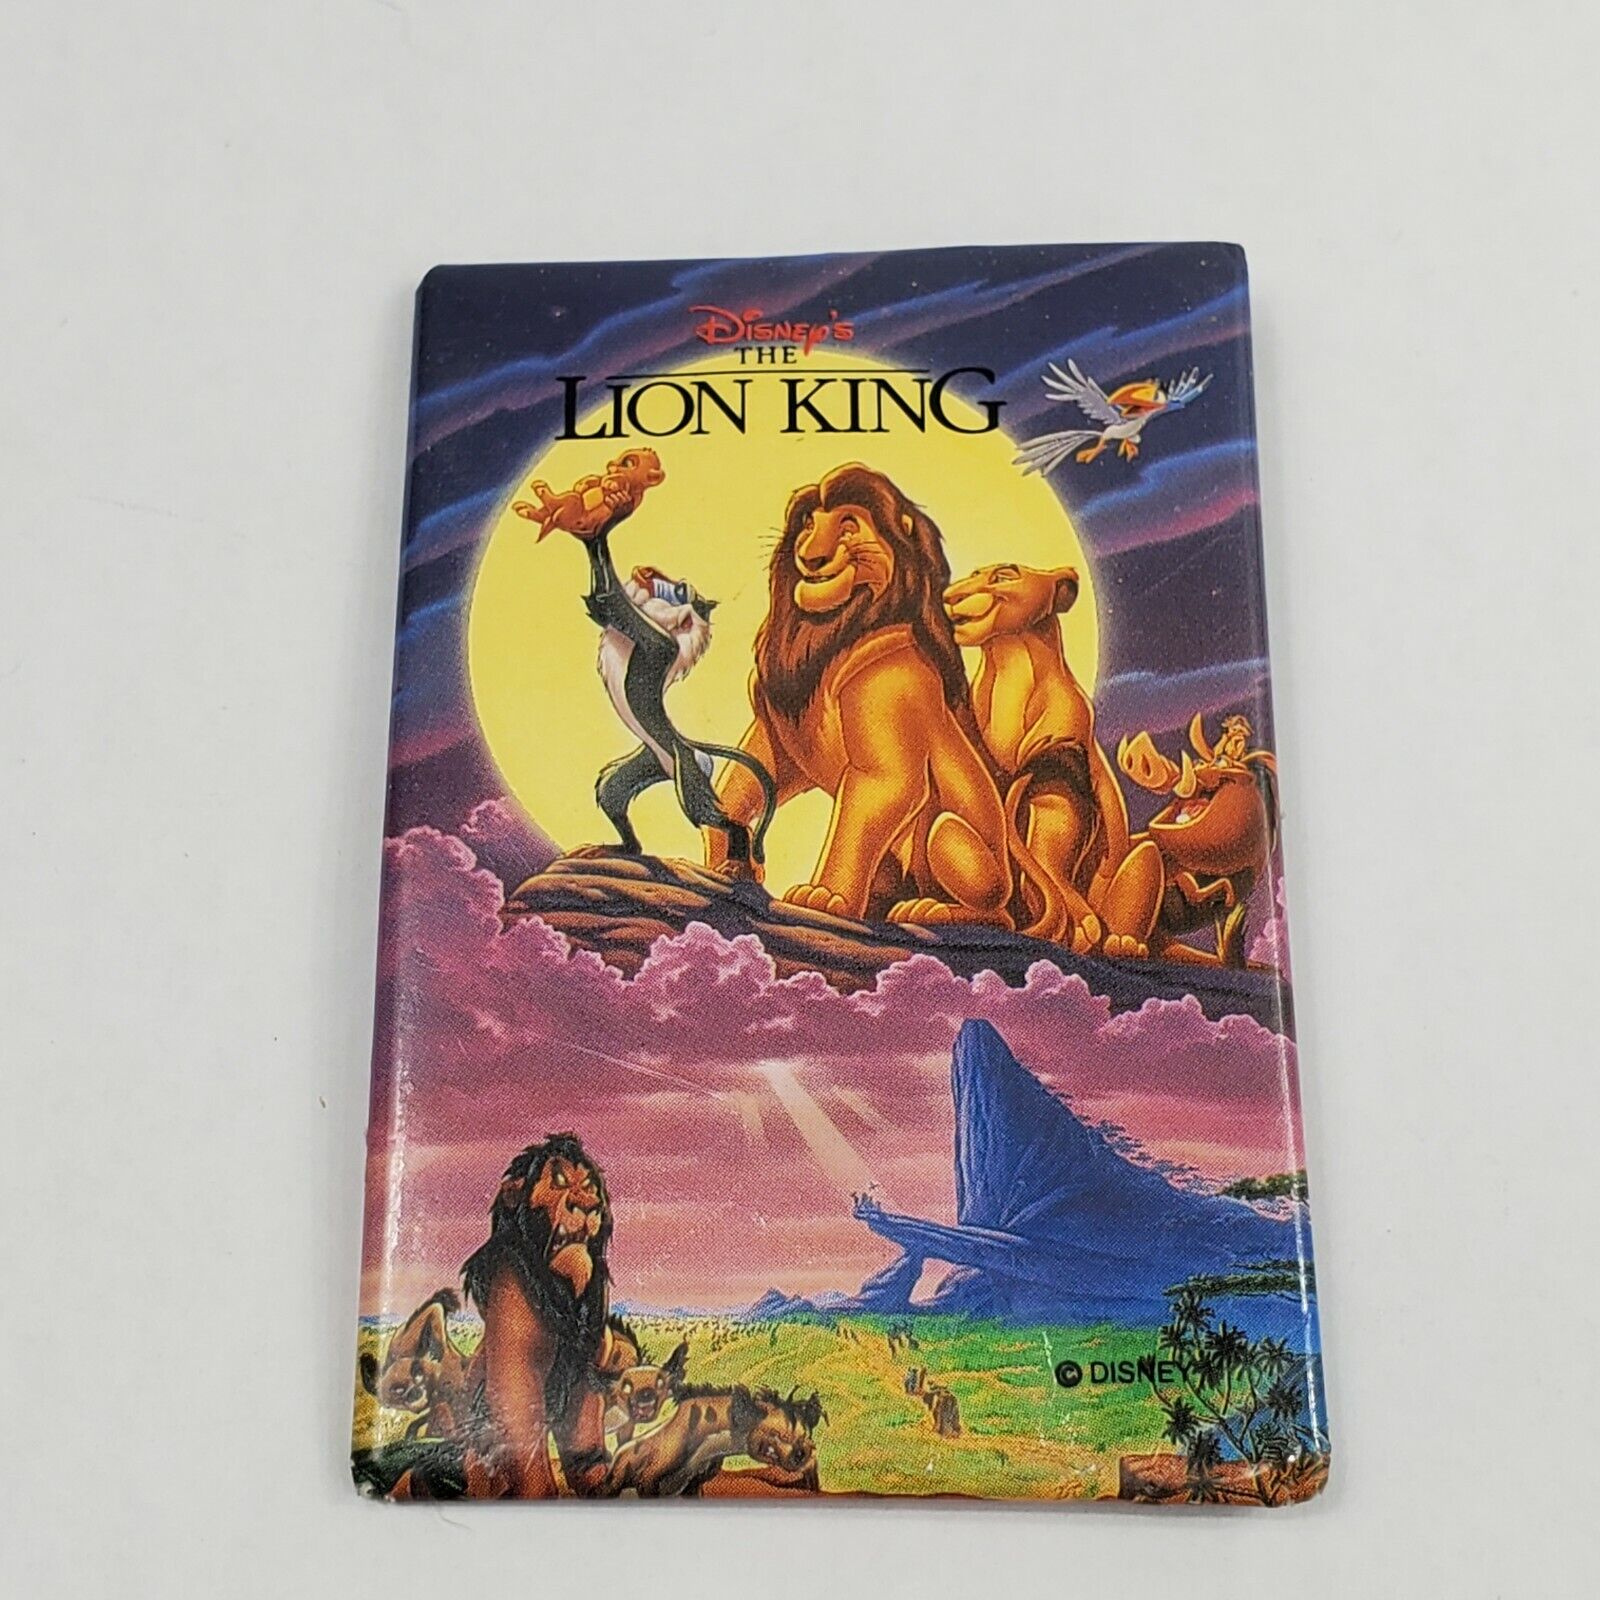 Disney World Cast Member Exclusive 1994 The Lion King Release Pin Rare Pinback